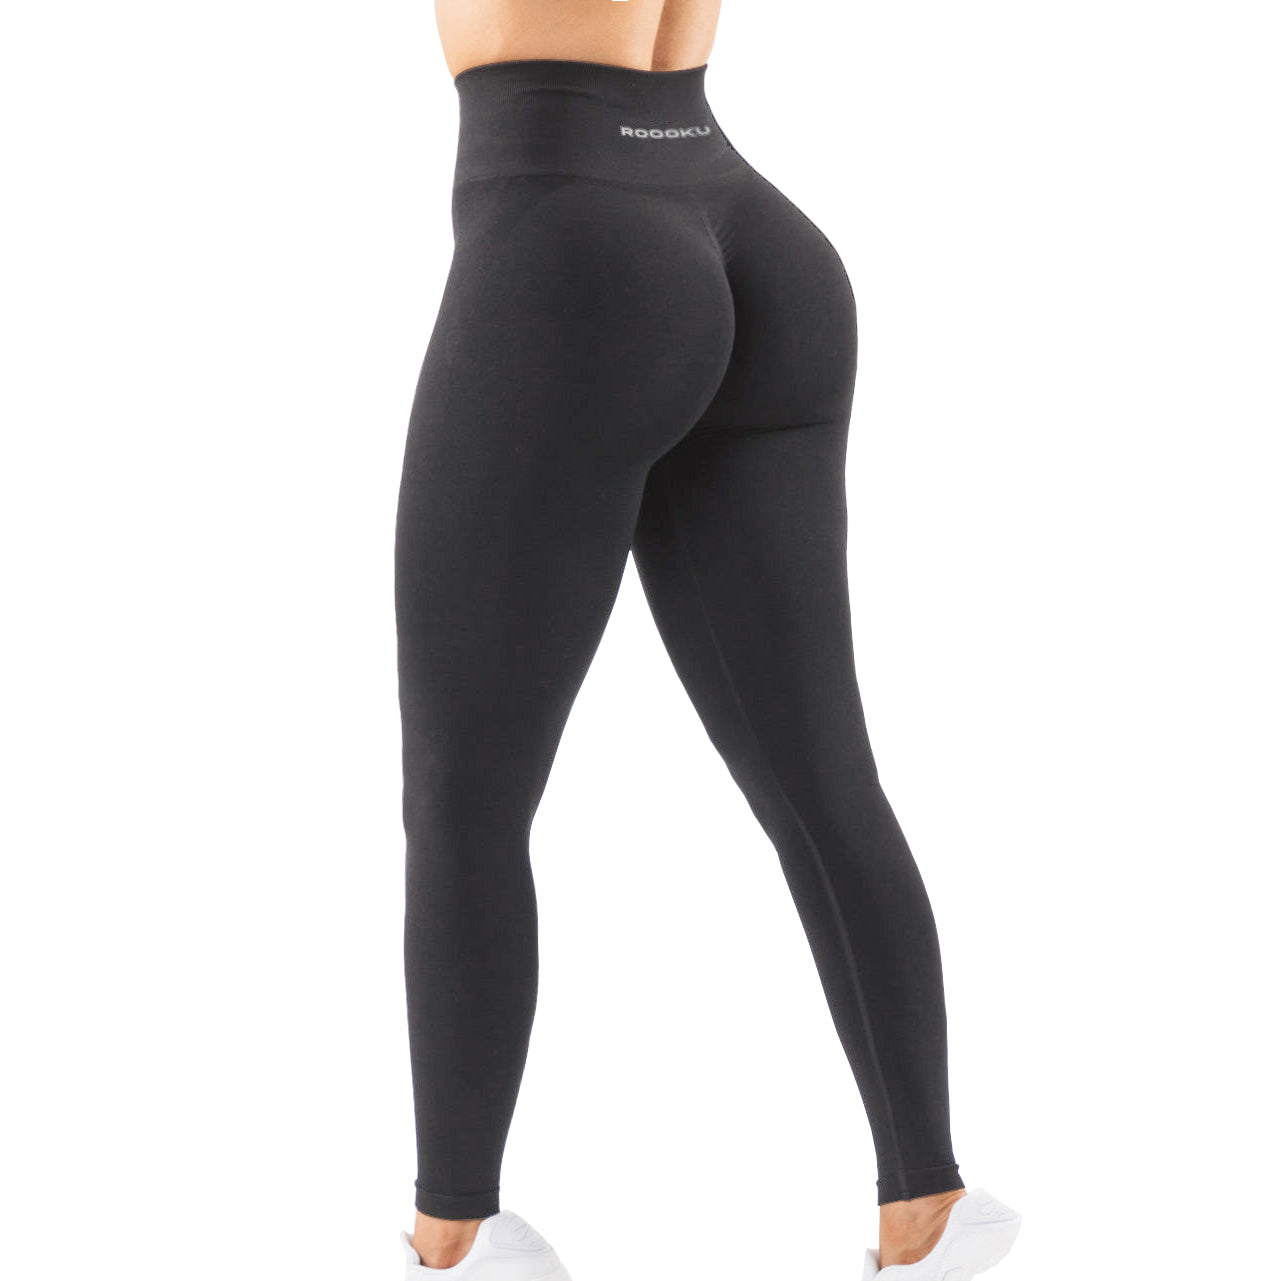 IMPORTANT: Everyone Needs to Quit Squats and Buy These Booty-Popping  Leggings in Every Color